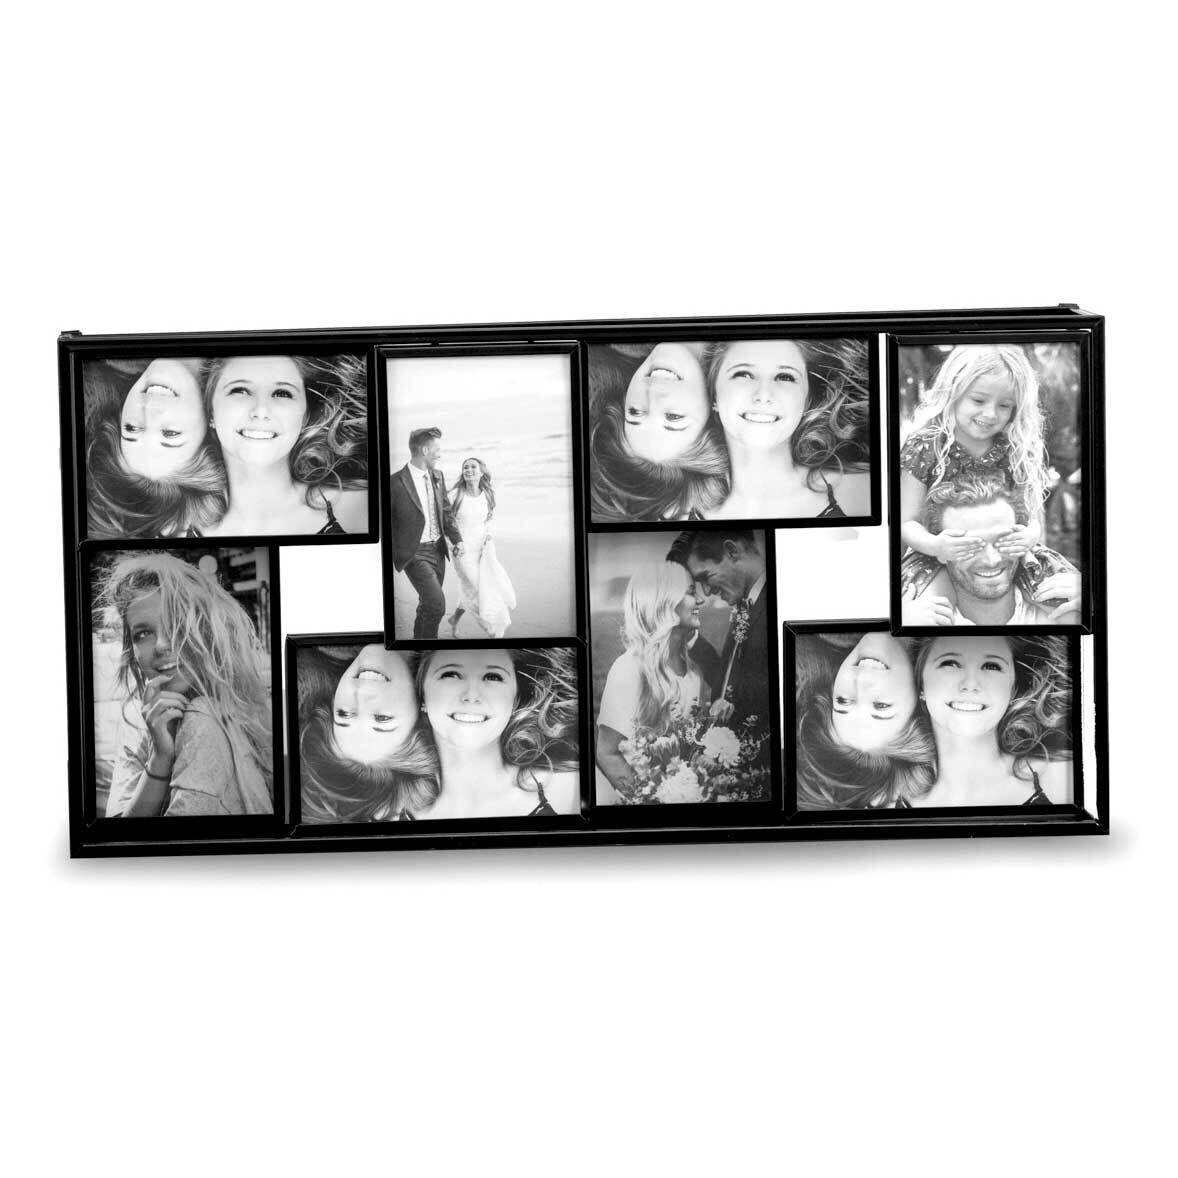 Black Metal 4 x 6 Inch Photo Collage Picture Frame GM21610